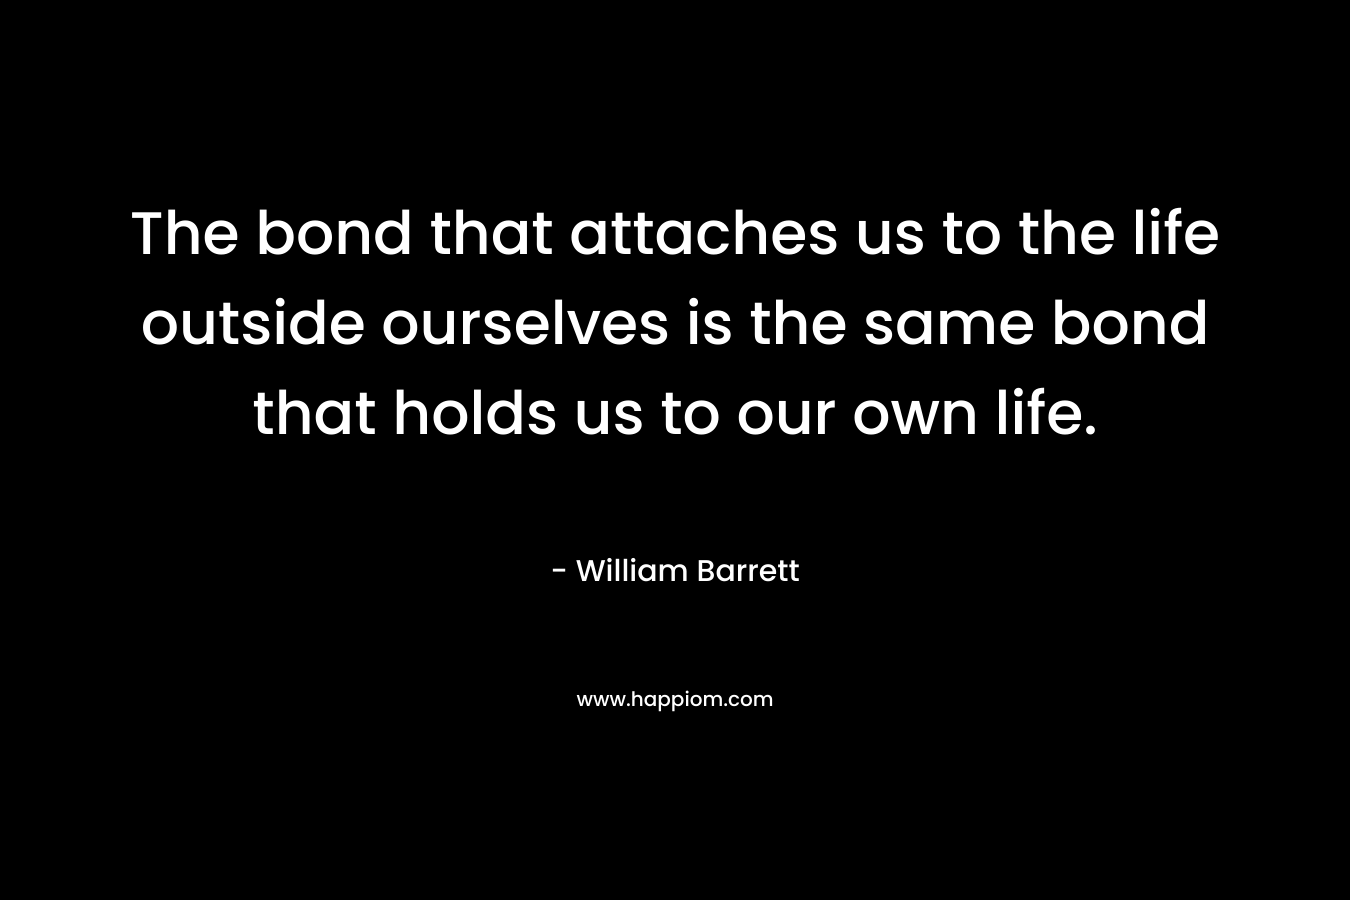 The bond that attaches us to the life outside ourselves is the same bond that holds us to our own life. – William Barrett